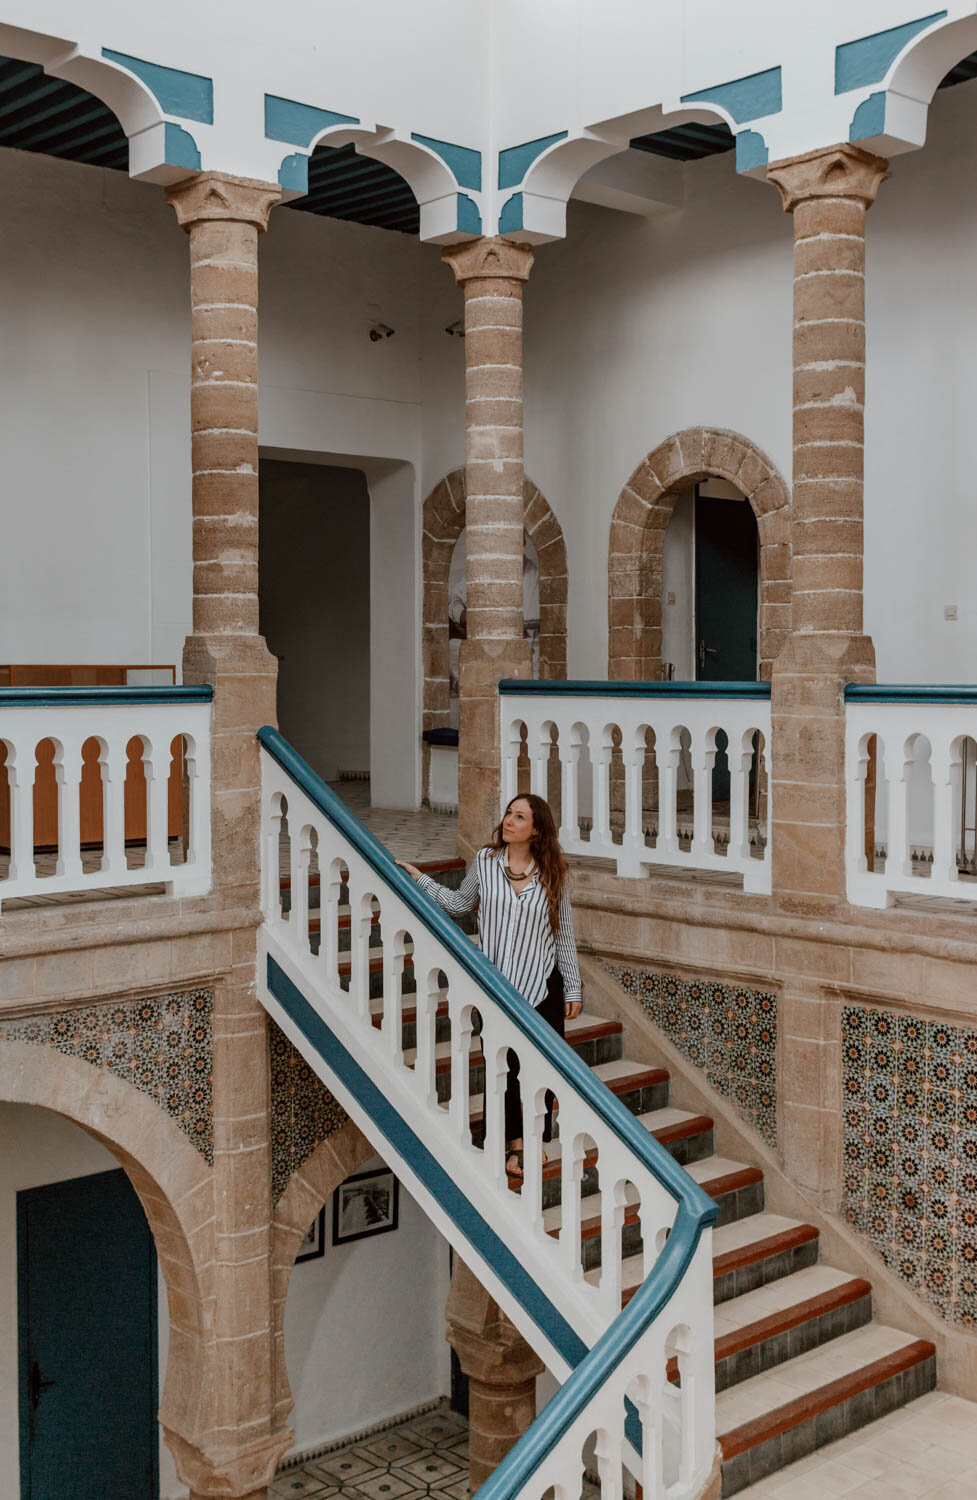 Things to do in Essaouira Morocco | Sidi Mohammed Ben Abdallah Museum